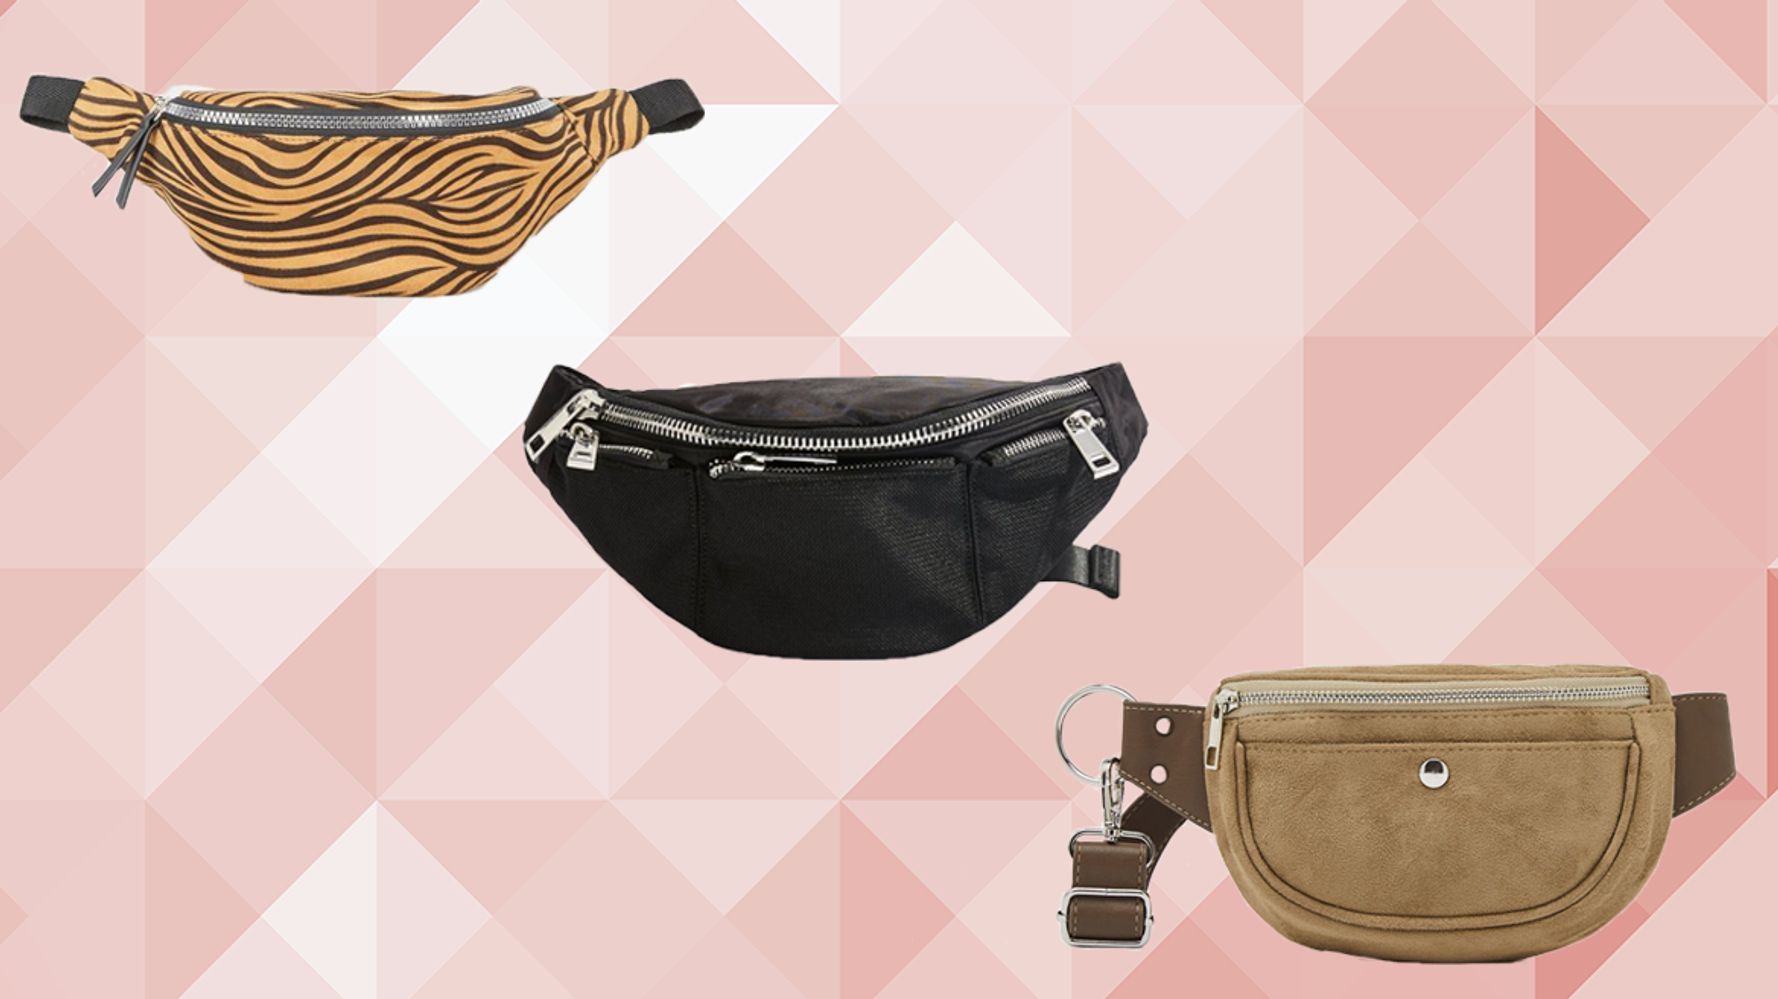 The Borderline Absurdity of a $3K Fanny Pack